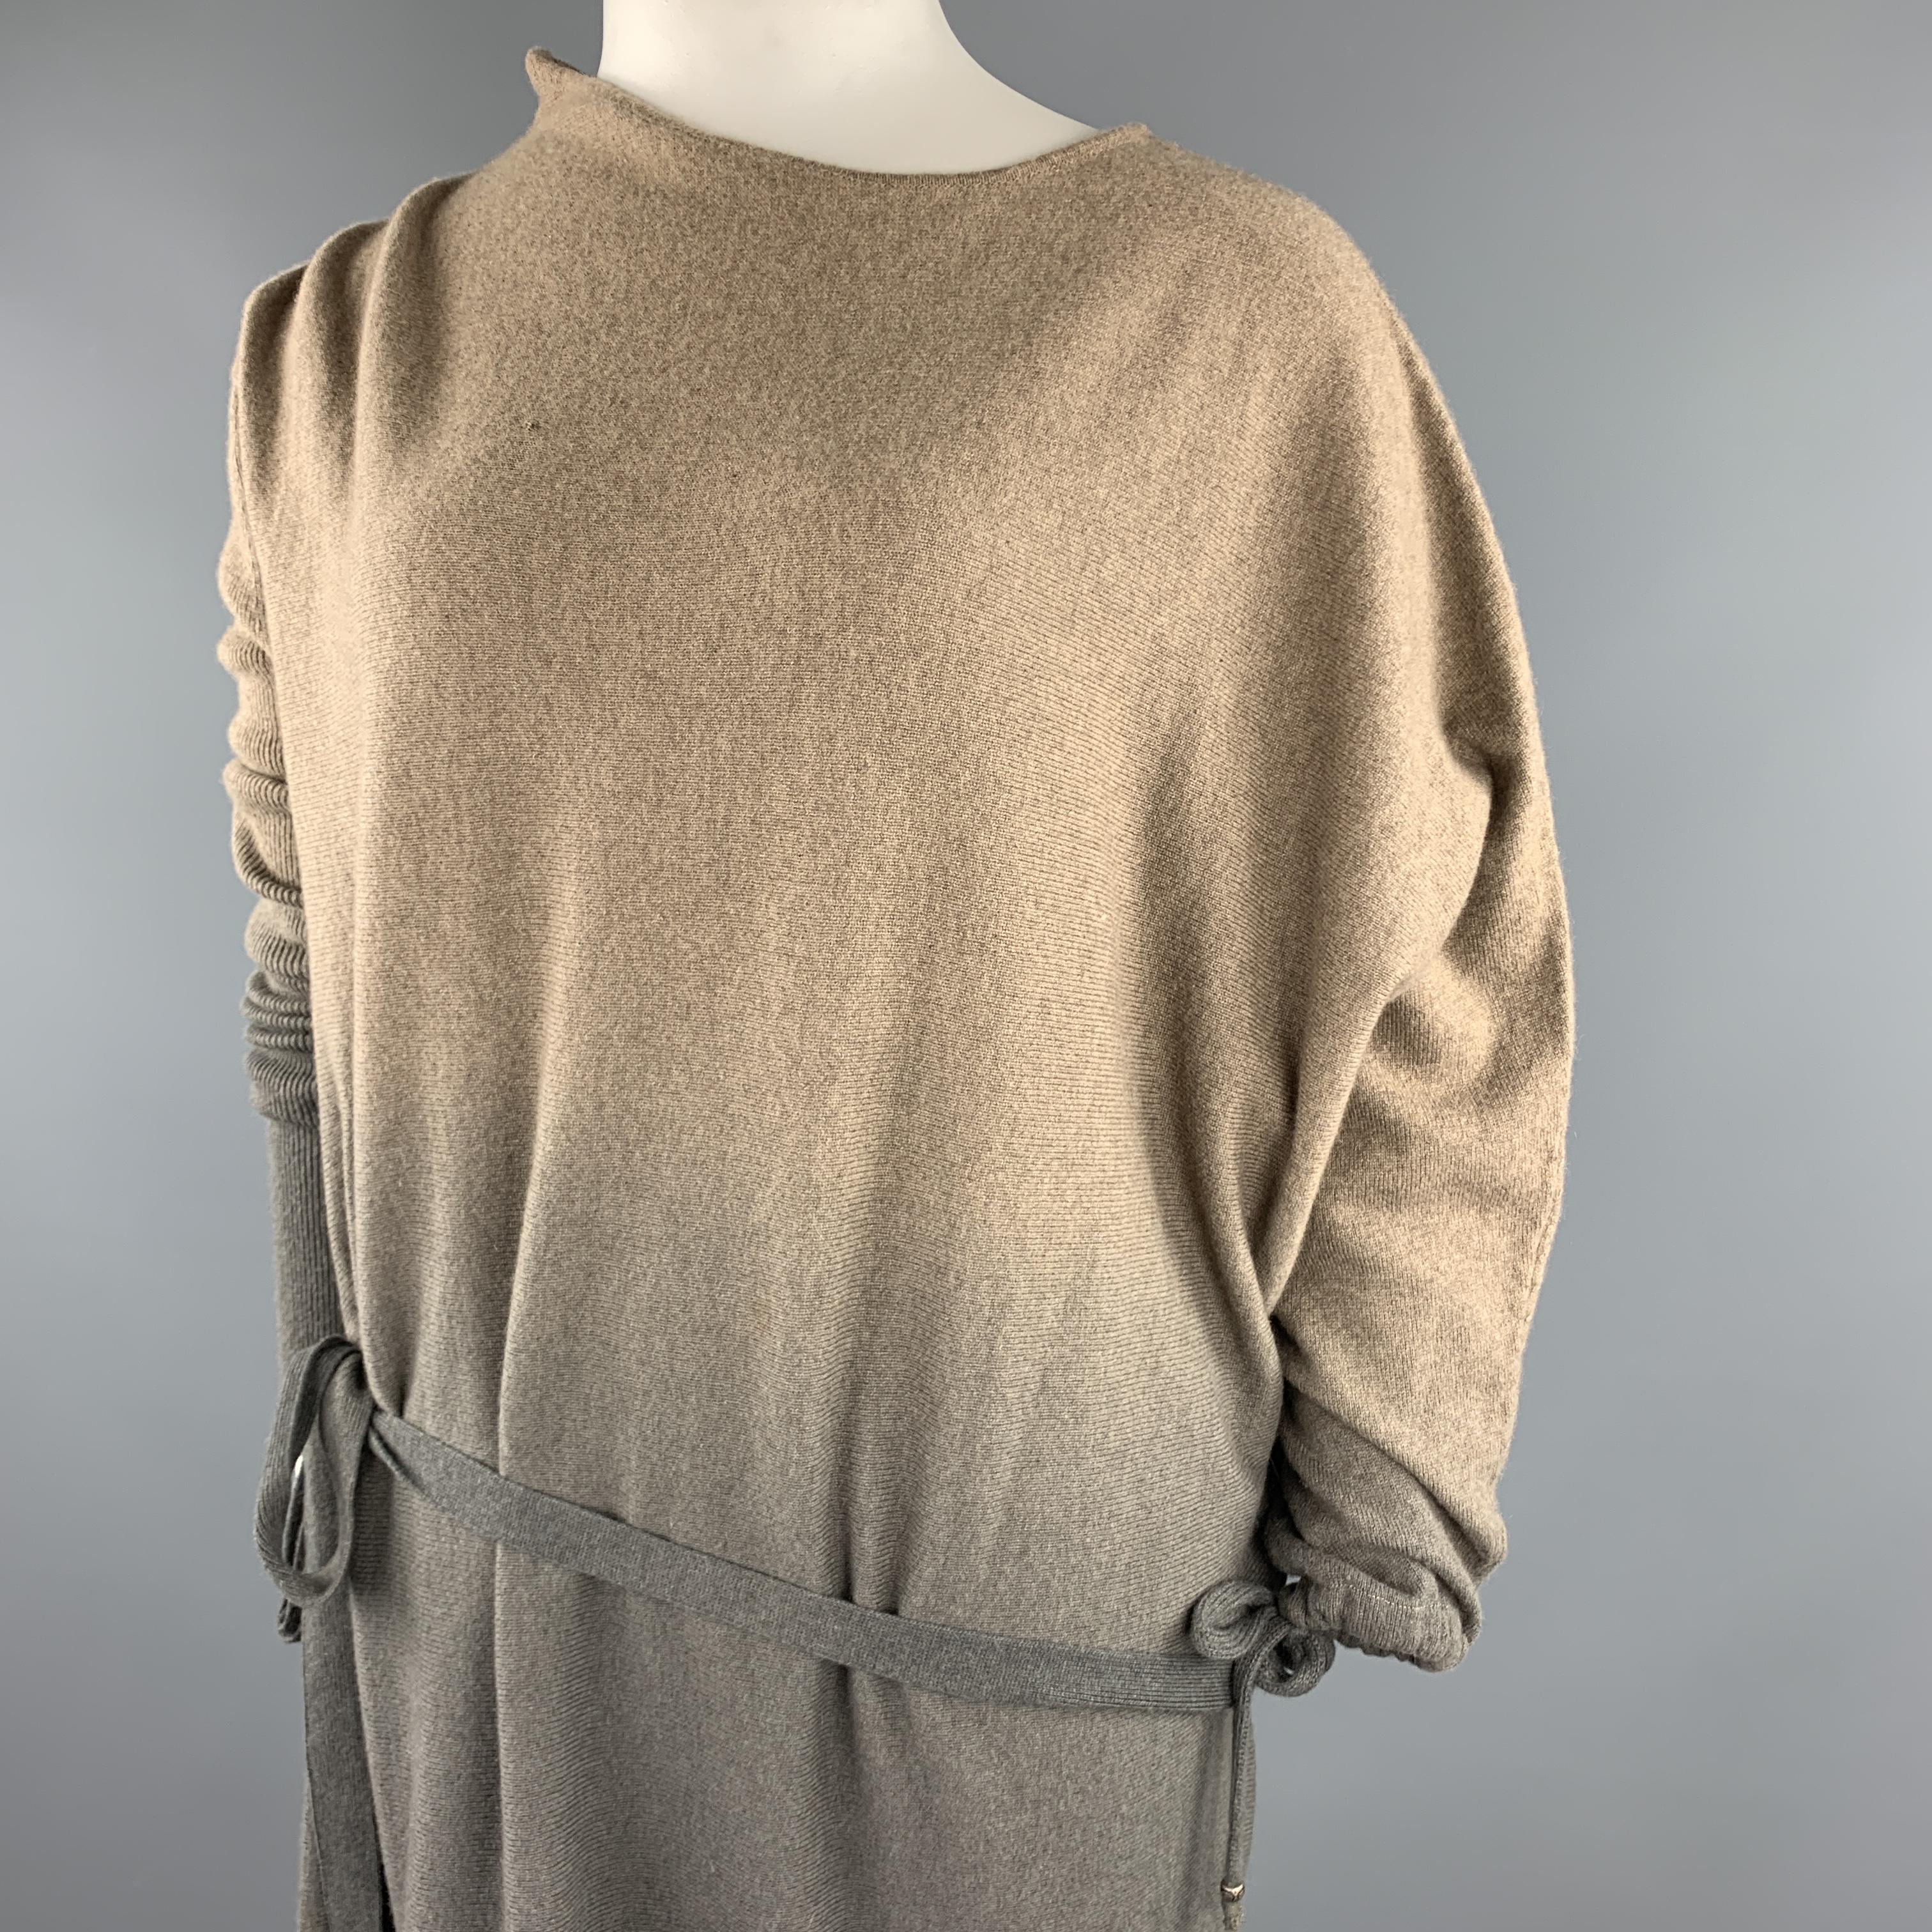 HENRY BEGUELIN sweater dress comes in tape cashmere knit with an all over ombre effect , asymmetrical design, tied drawstring cuff and belt. Made in Italy.

Very Good Pre-Owned Condition.
Marked: (no size)

Measurements:

Shoulder: 20 in.
Chest: 4